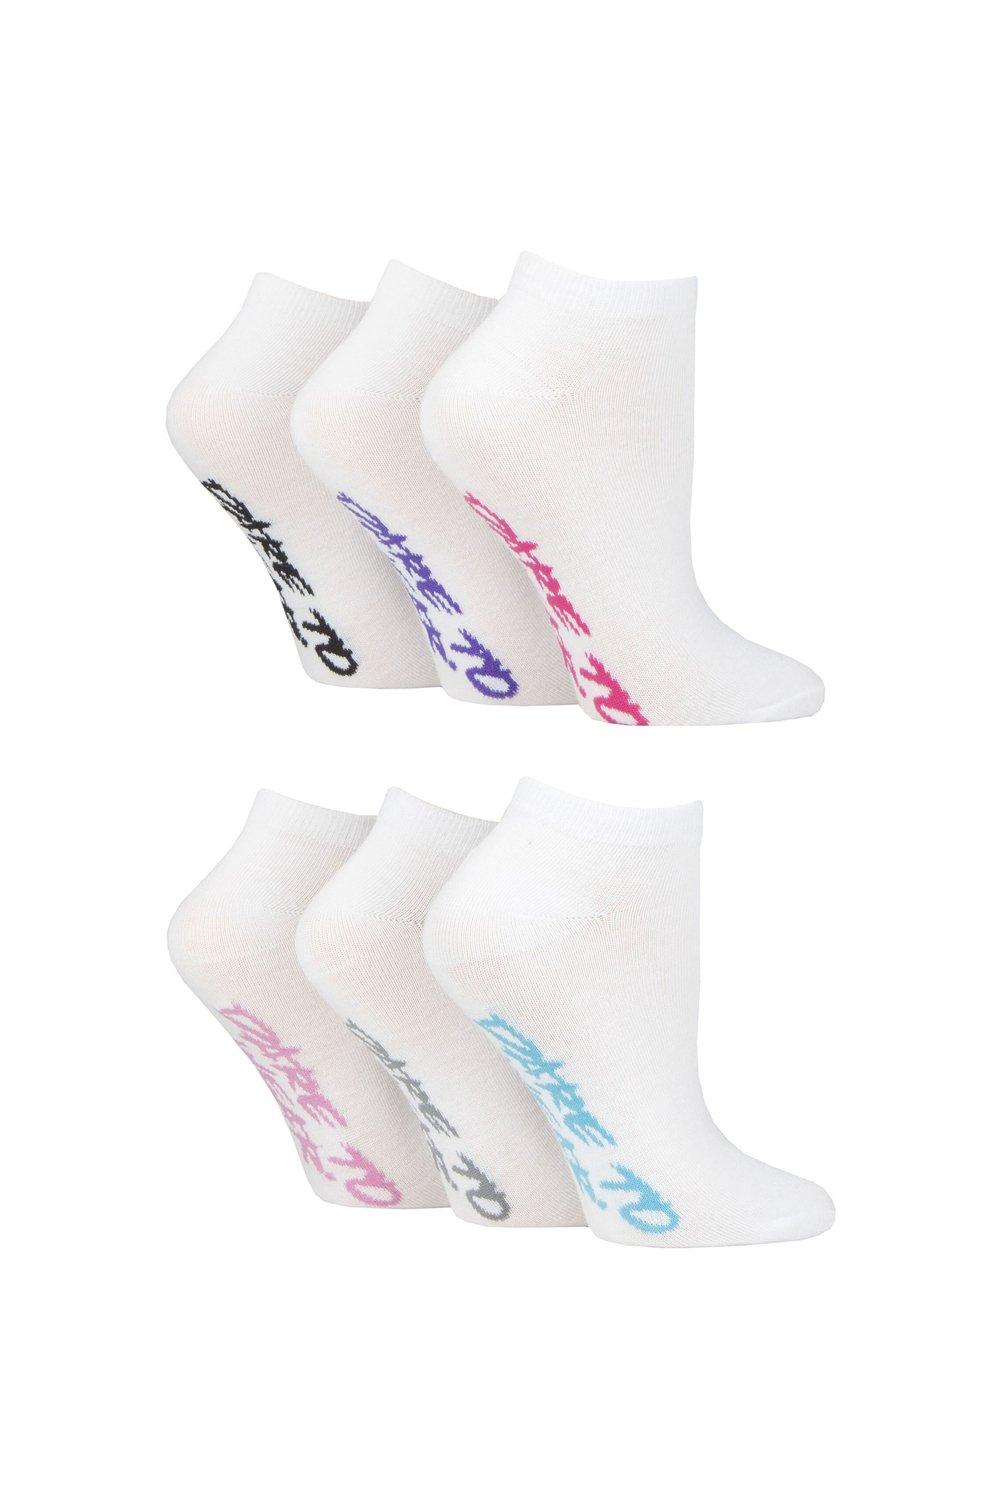 6 Pair Dare to Wear Patterned and Plain Trainer Socks